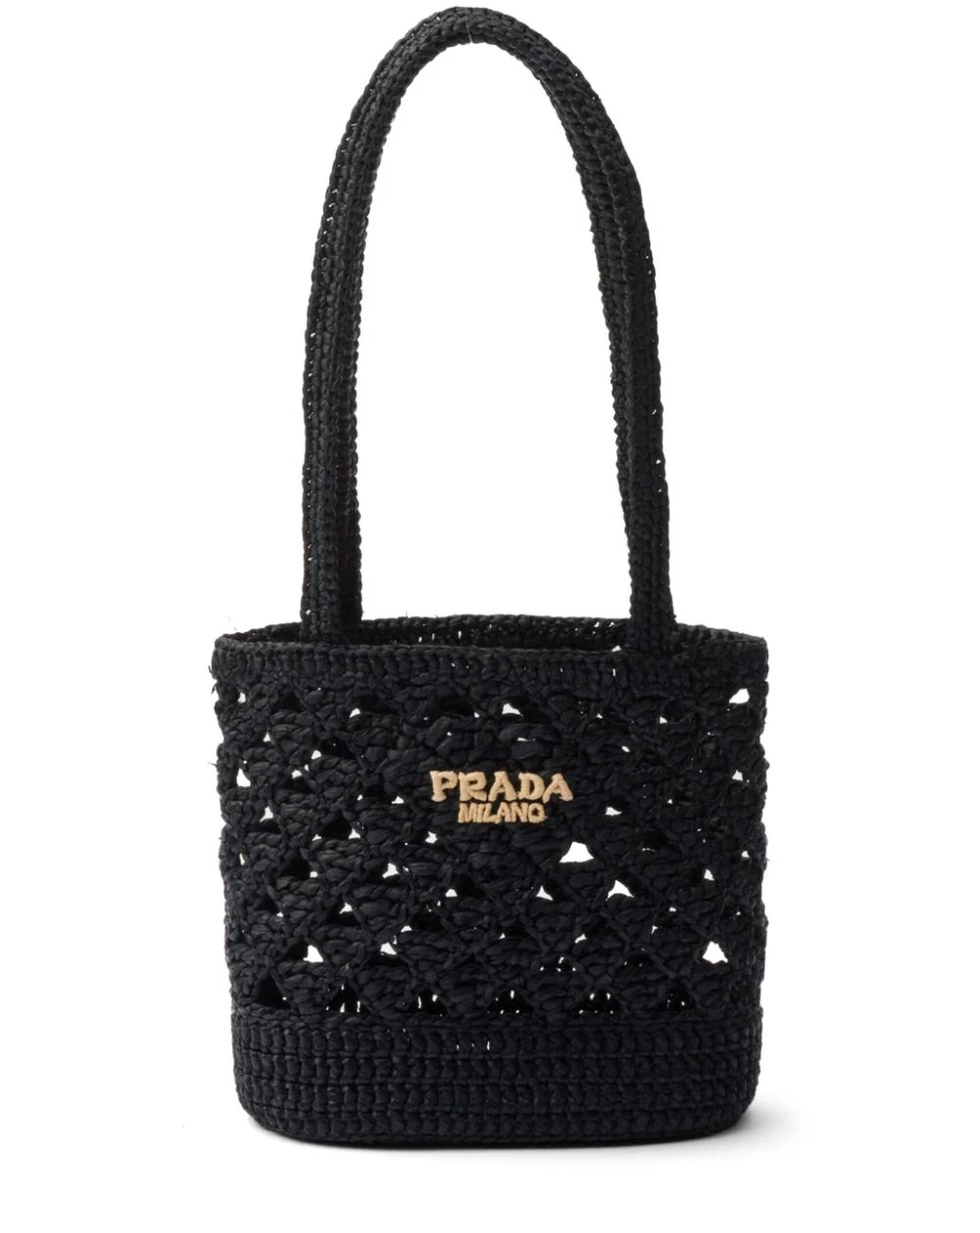 a black purse with a white background